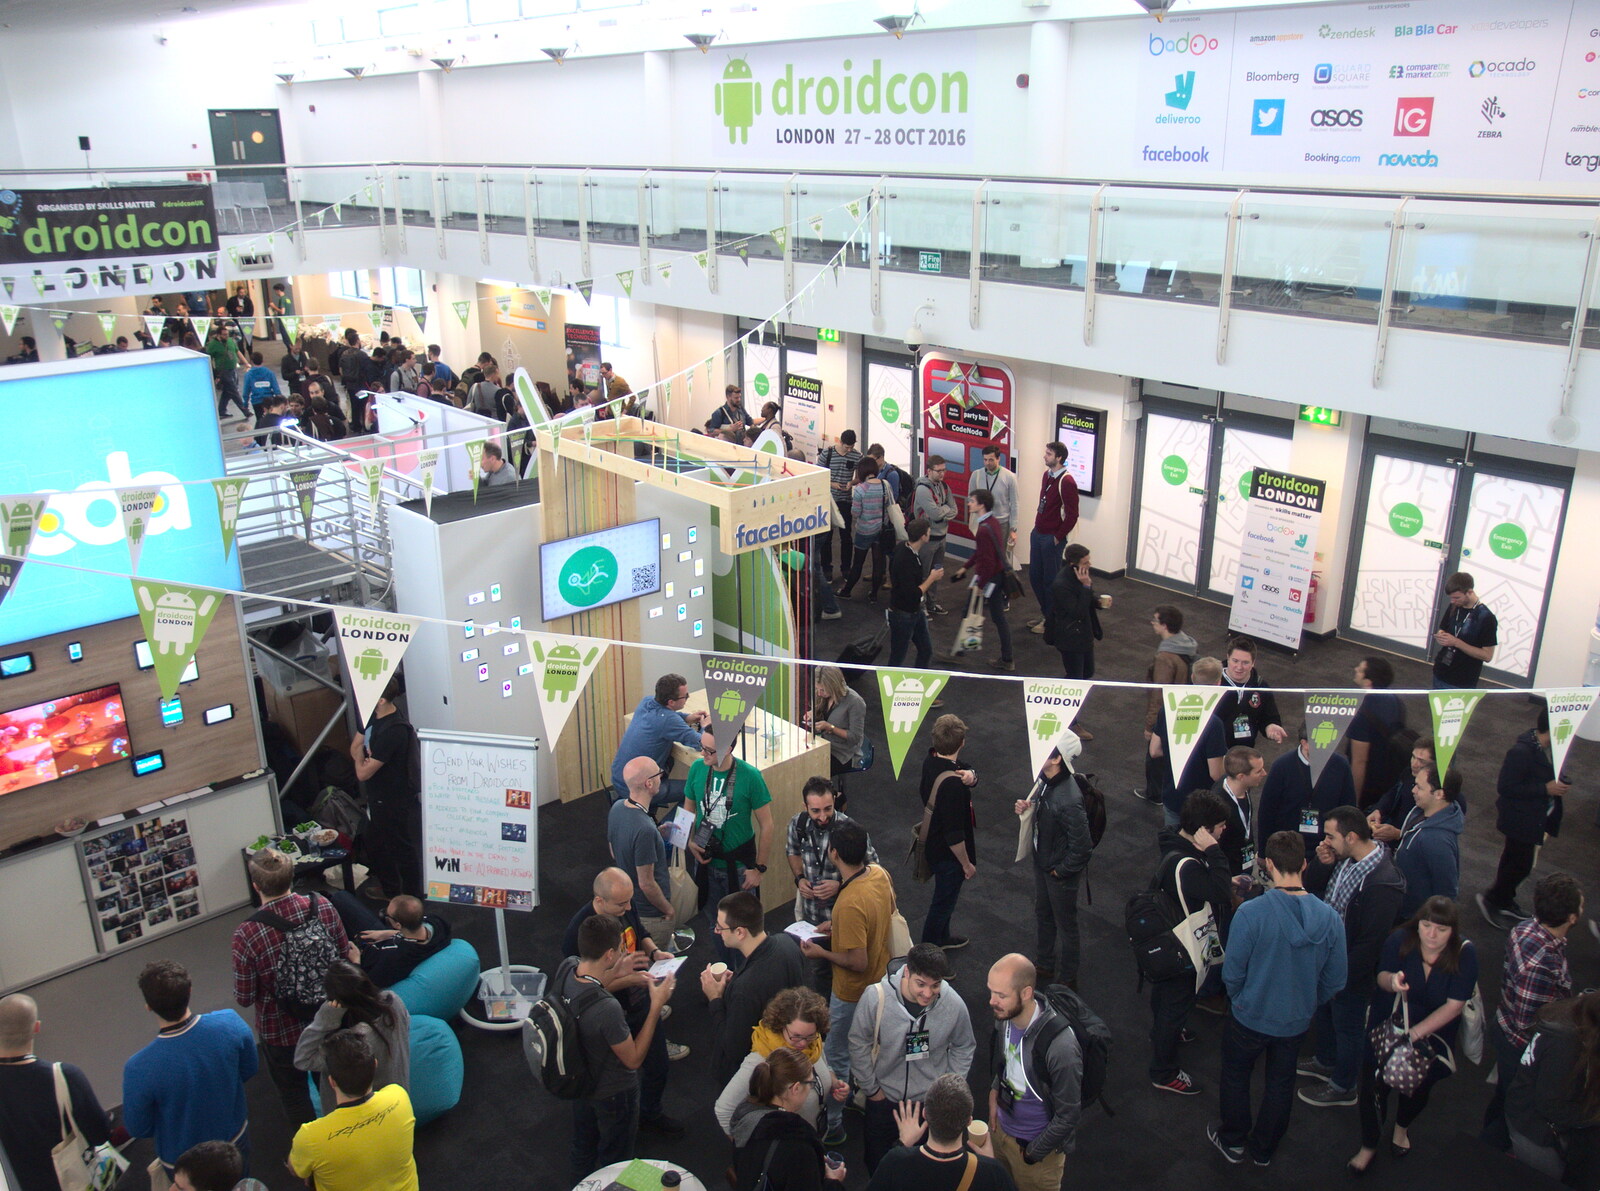 Crowds of nerds from Droidcon 2016, Islington, London - 27th October 2016